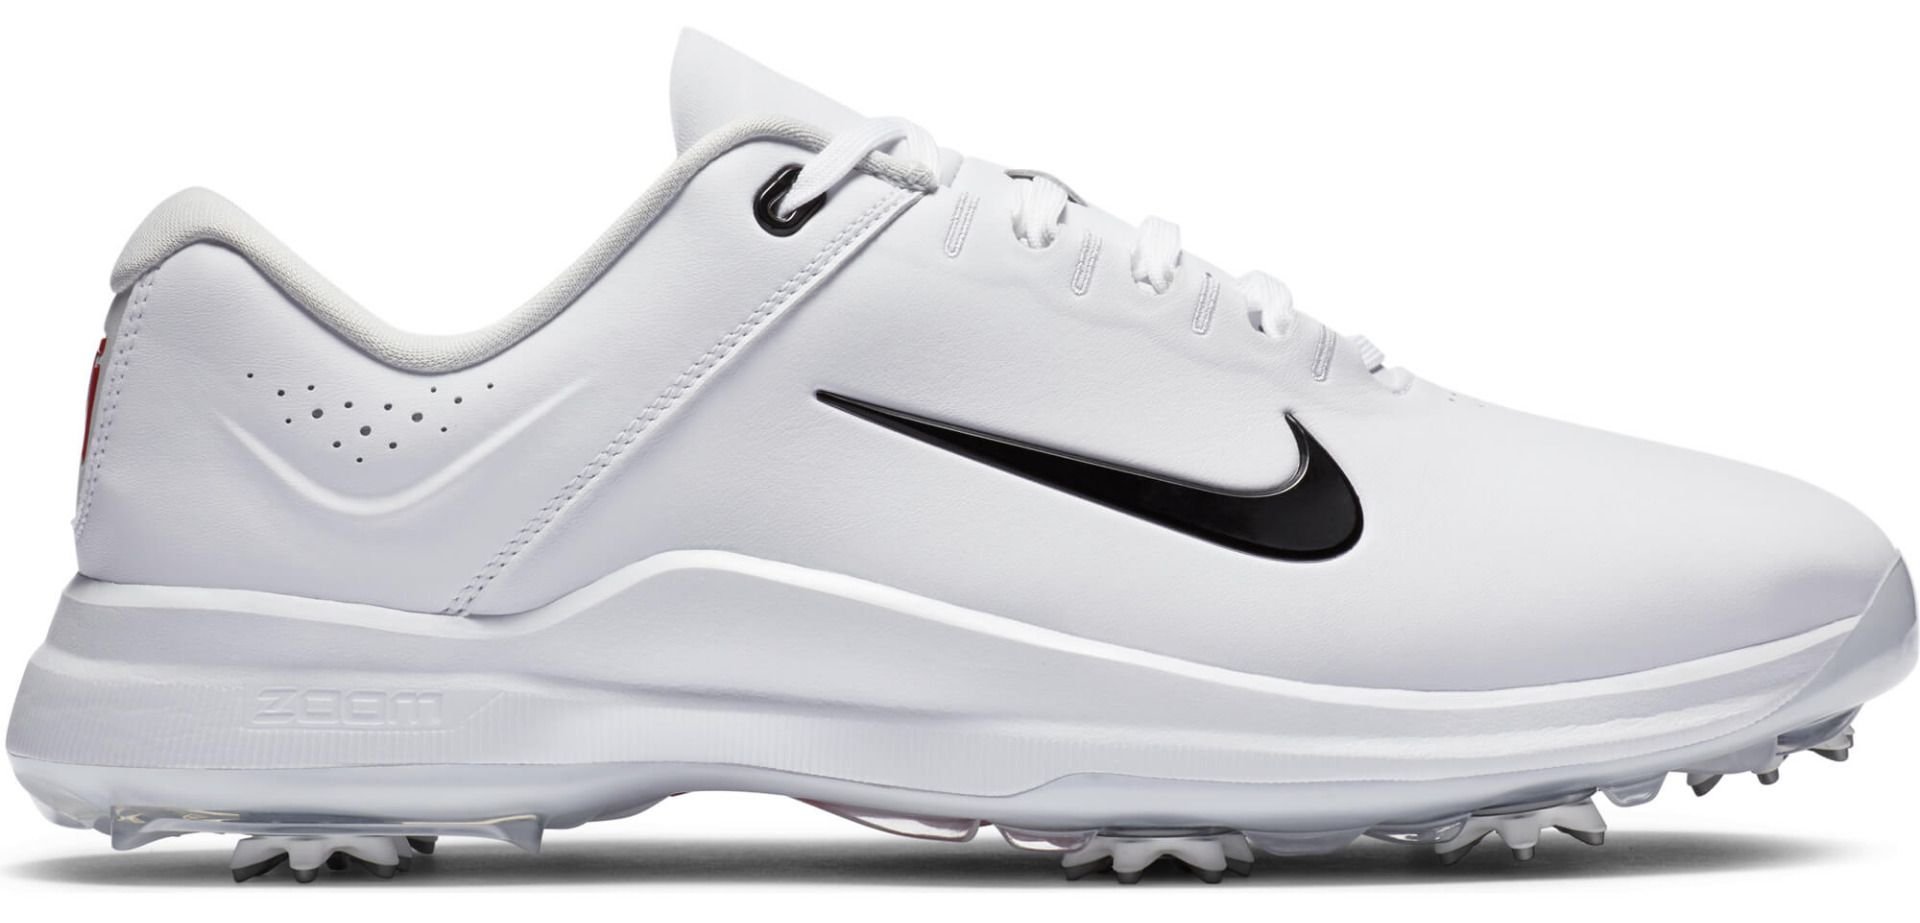 Nike Air Zoom TW Tiger Woods Golf Shoes - White/Black/Gym Red/Photon Dust